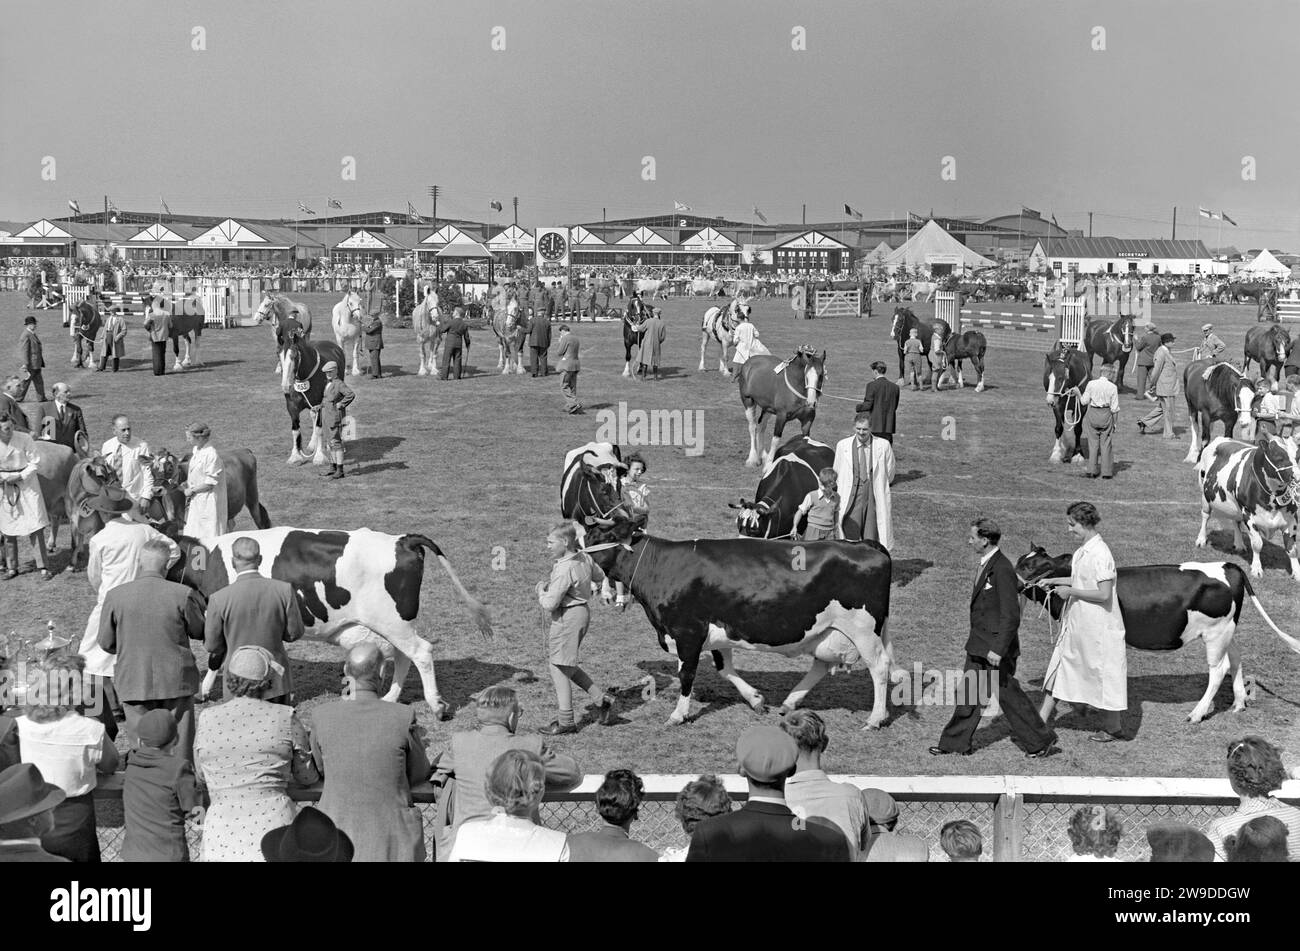 Working horses lined up and cattle parading and being judged in the showground’s main arena at The Royal Lancashire Show c.1960. The Royal Lancashire Show (RLS) is an agricultural show which takes place every year in Lancashire, England, UK. The show is organised by the Royal Lancashire Agricultural Society (RLAS) and is one of Britain's oldest, first taking place in 1767. From 1954 the show was held at Stanley Park, Blackpool up until 1972 – a vintage 1950s/60s photograph. Stock Photo